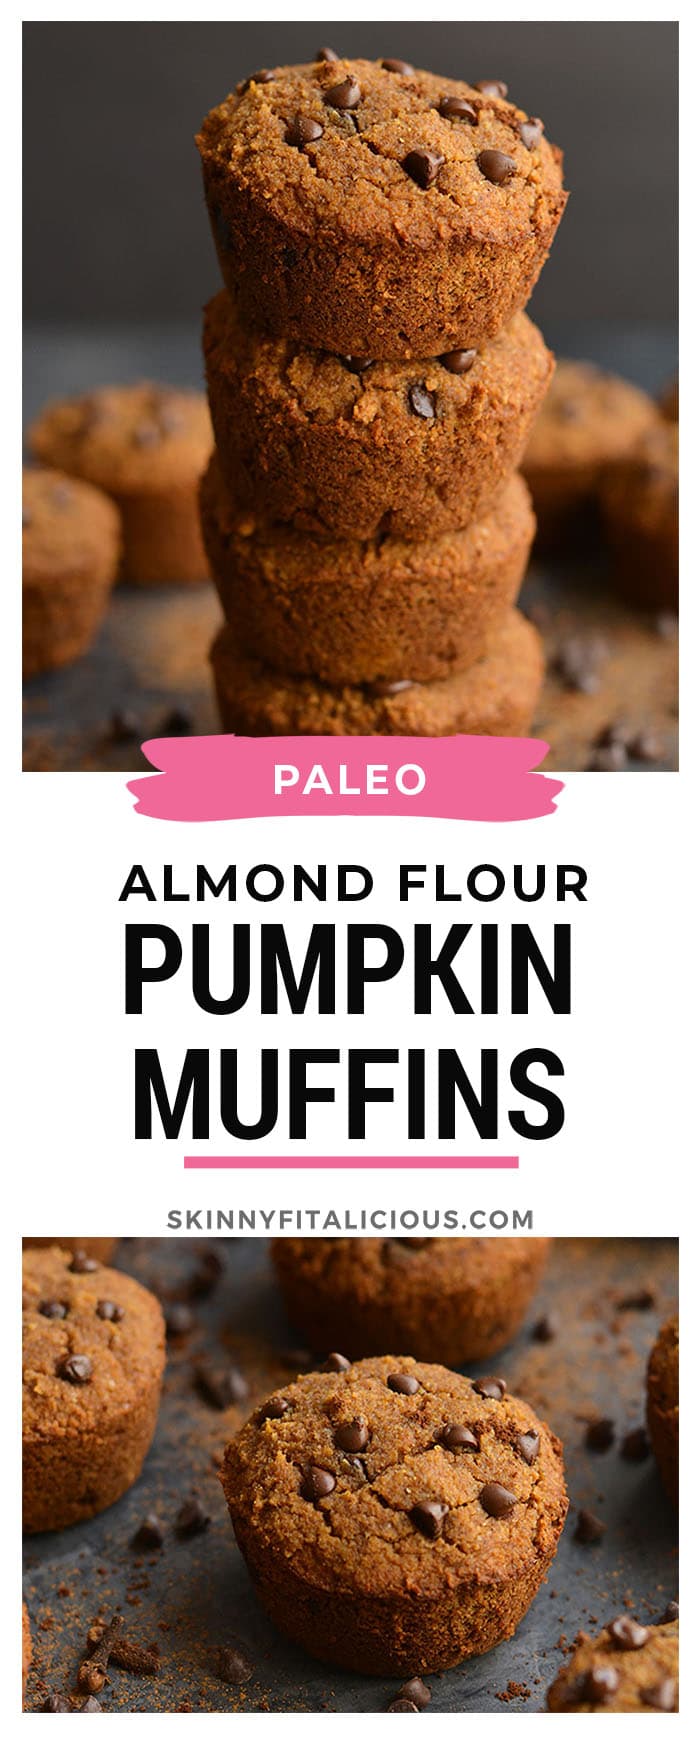 Paleo Almond Flour Pumpkin Muffins spiced with fall flavors and lightly sweetened. These muffins are soft, fluffy, quick to make and delicious! Make a batch for the week and setup yourself up with a healthy treat! Paleo + Gluten Free + Low Calorie